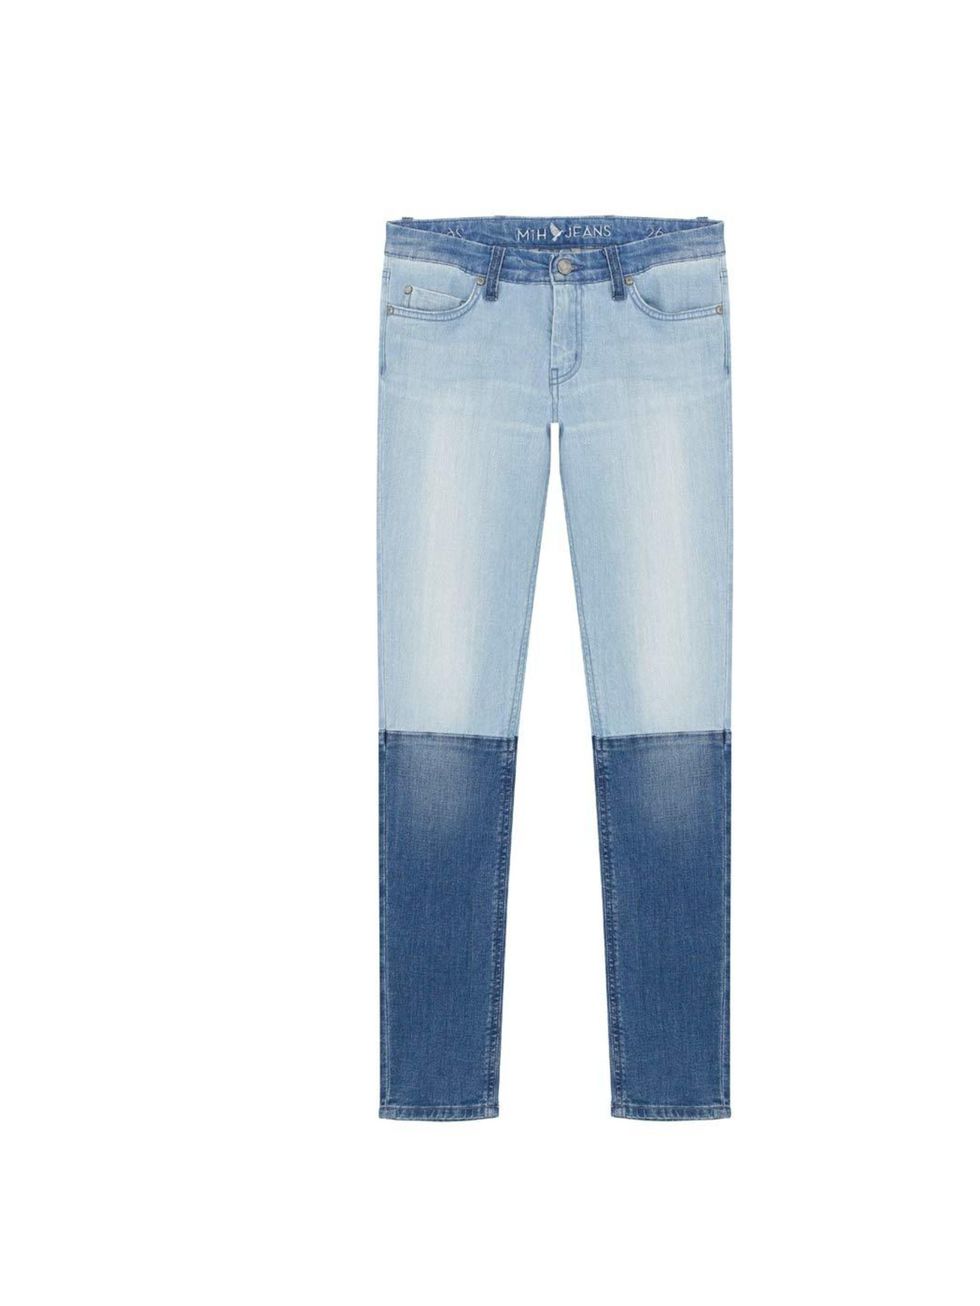 <p>Love this two-tone washed denim from <a href="http://www.mih-jeans.com/womens-jeans/the-breathless-j-street.html">Made in Heaven</a>, £200</p>